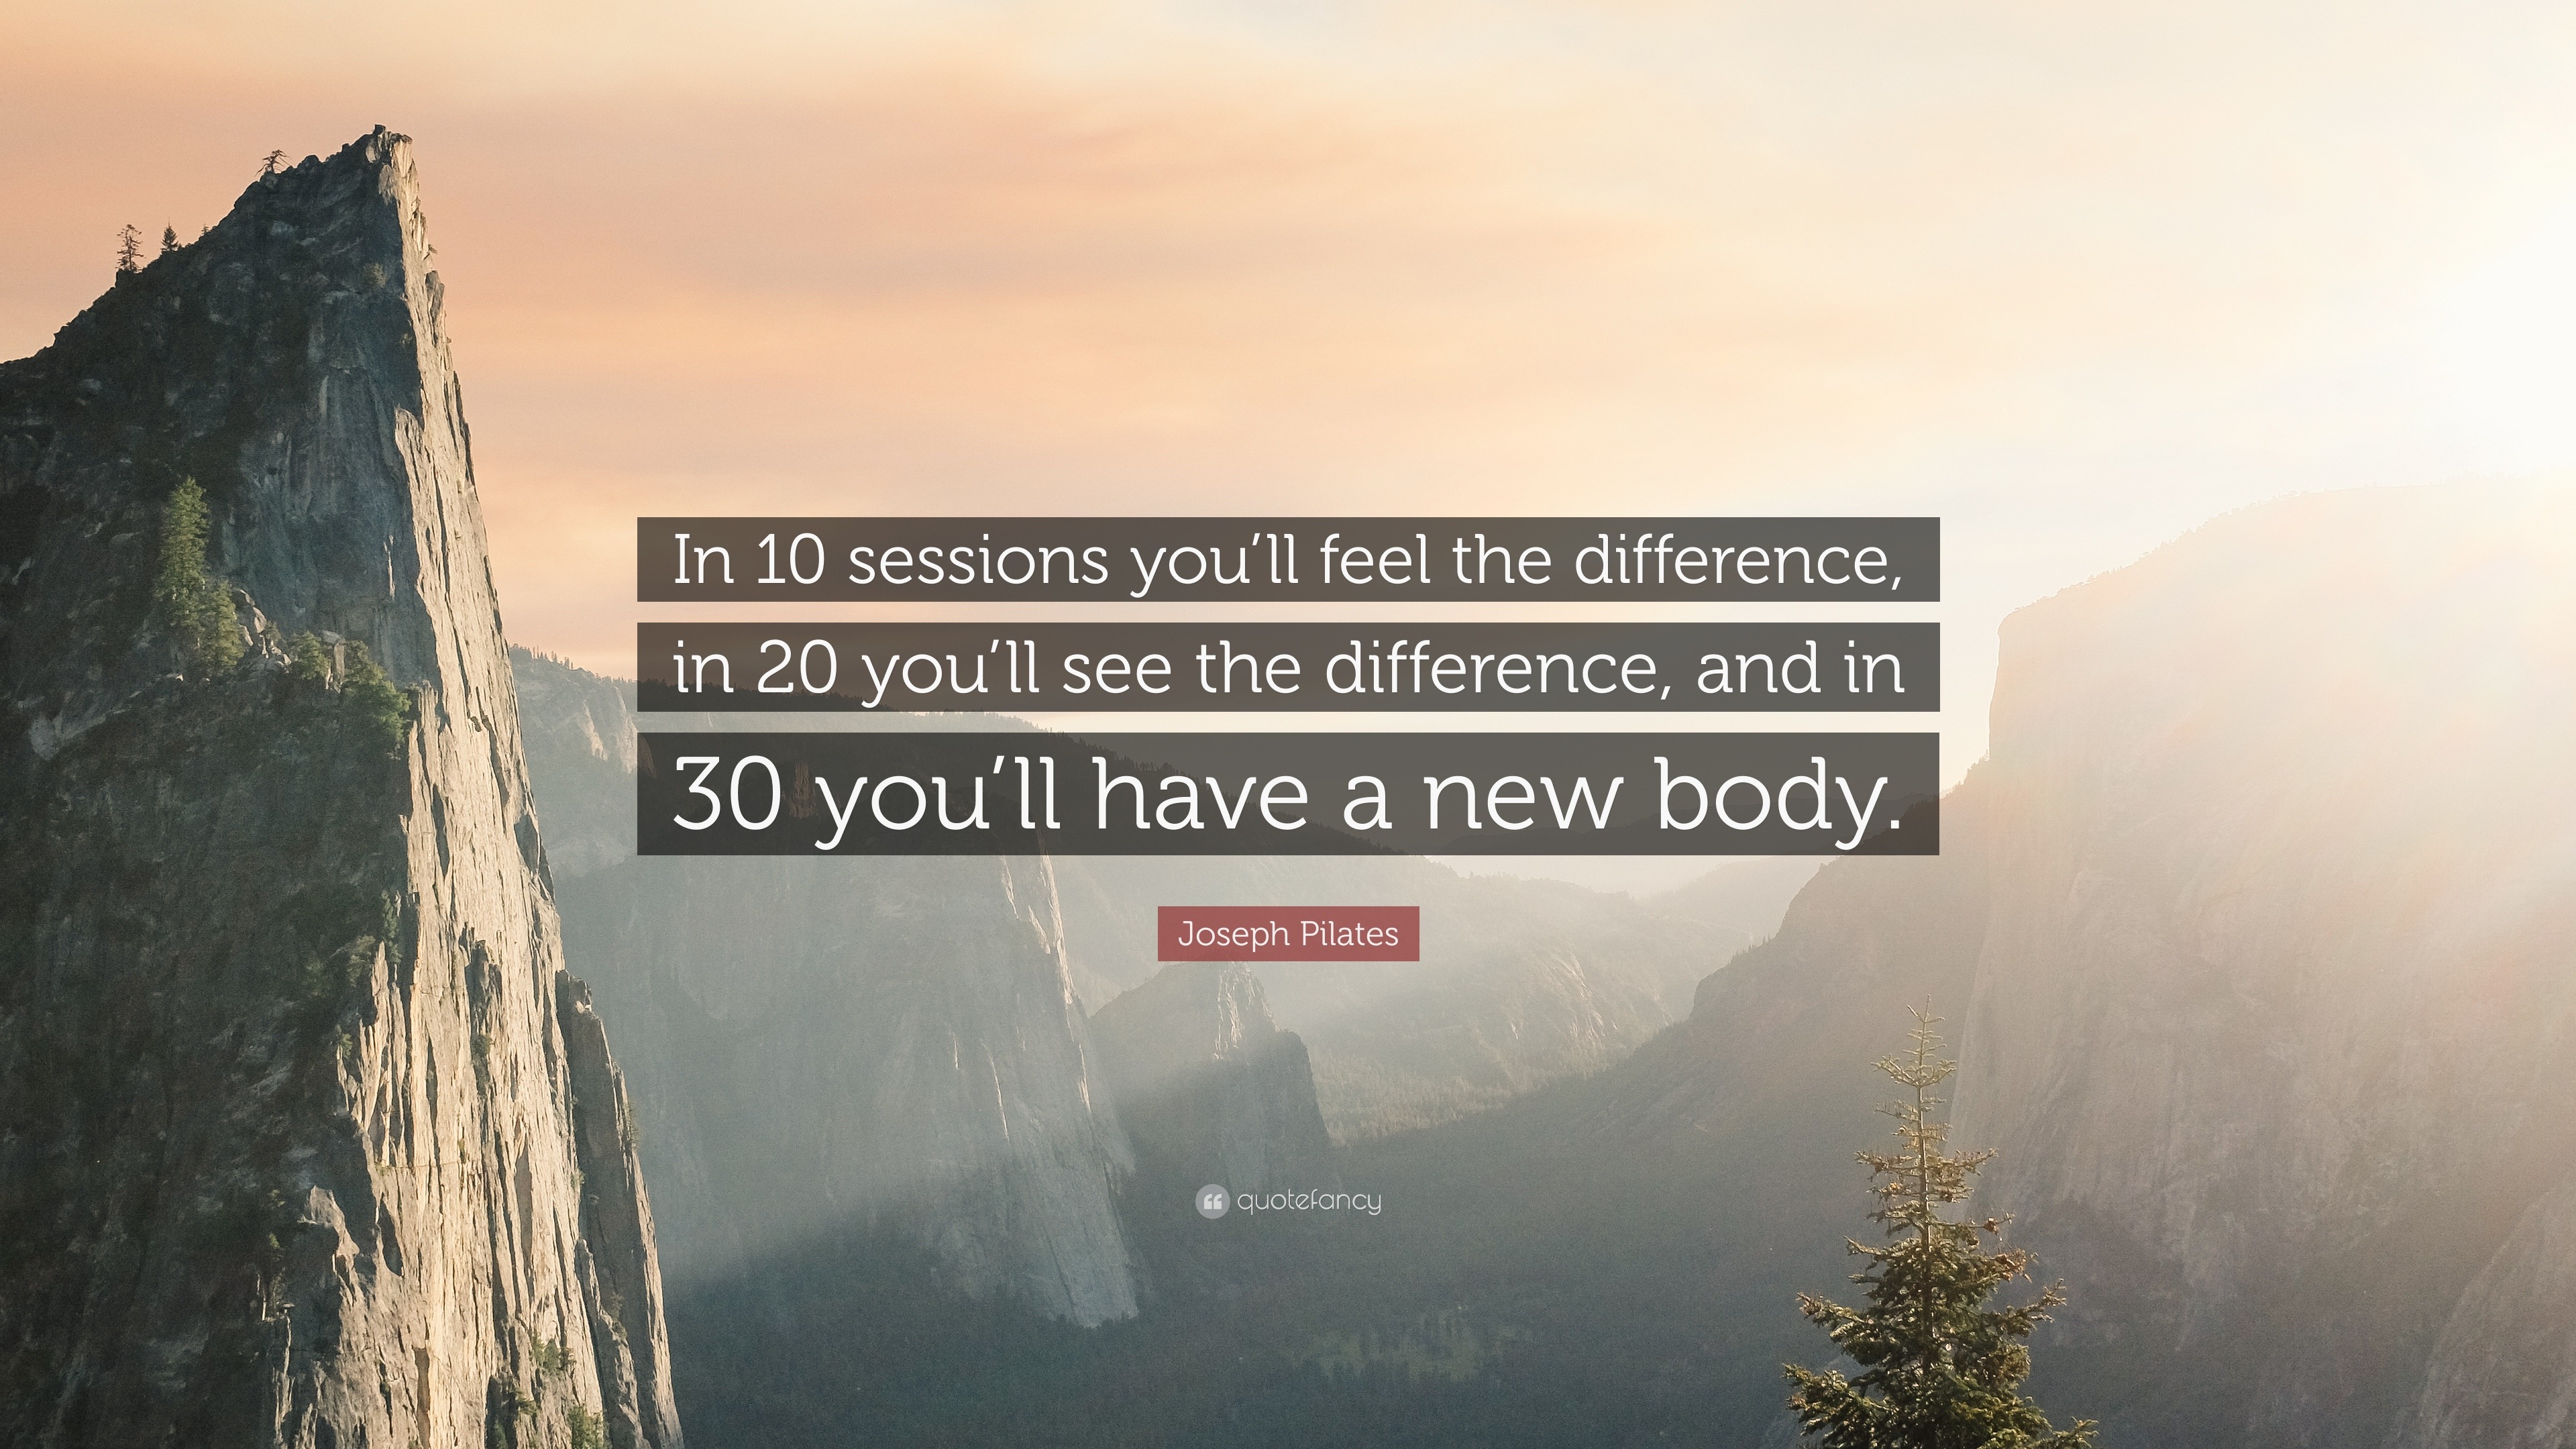 Joseph Pilates Quote: “In 10 sessions you'll feel the difference, in 20  you'll see